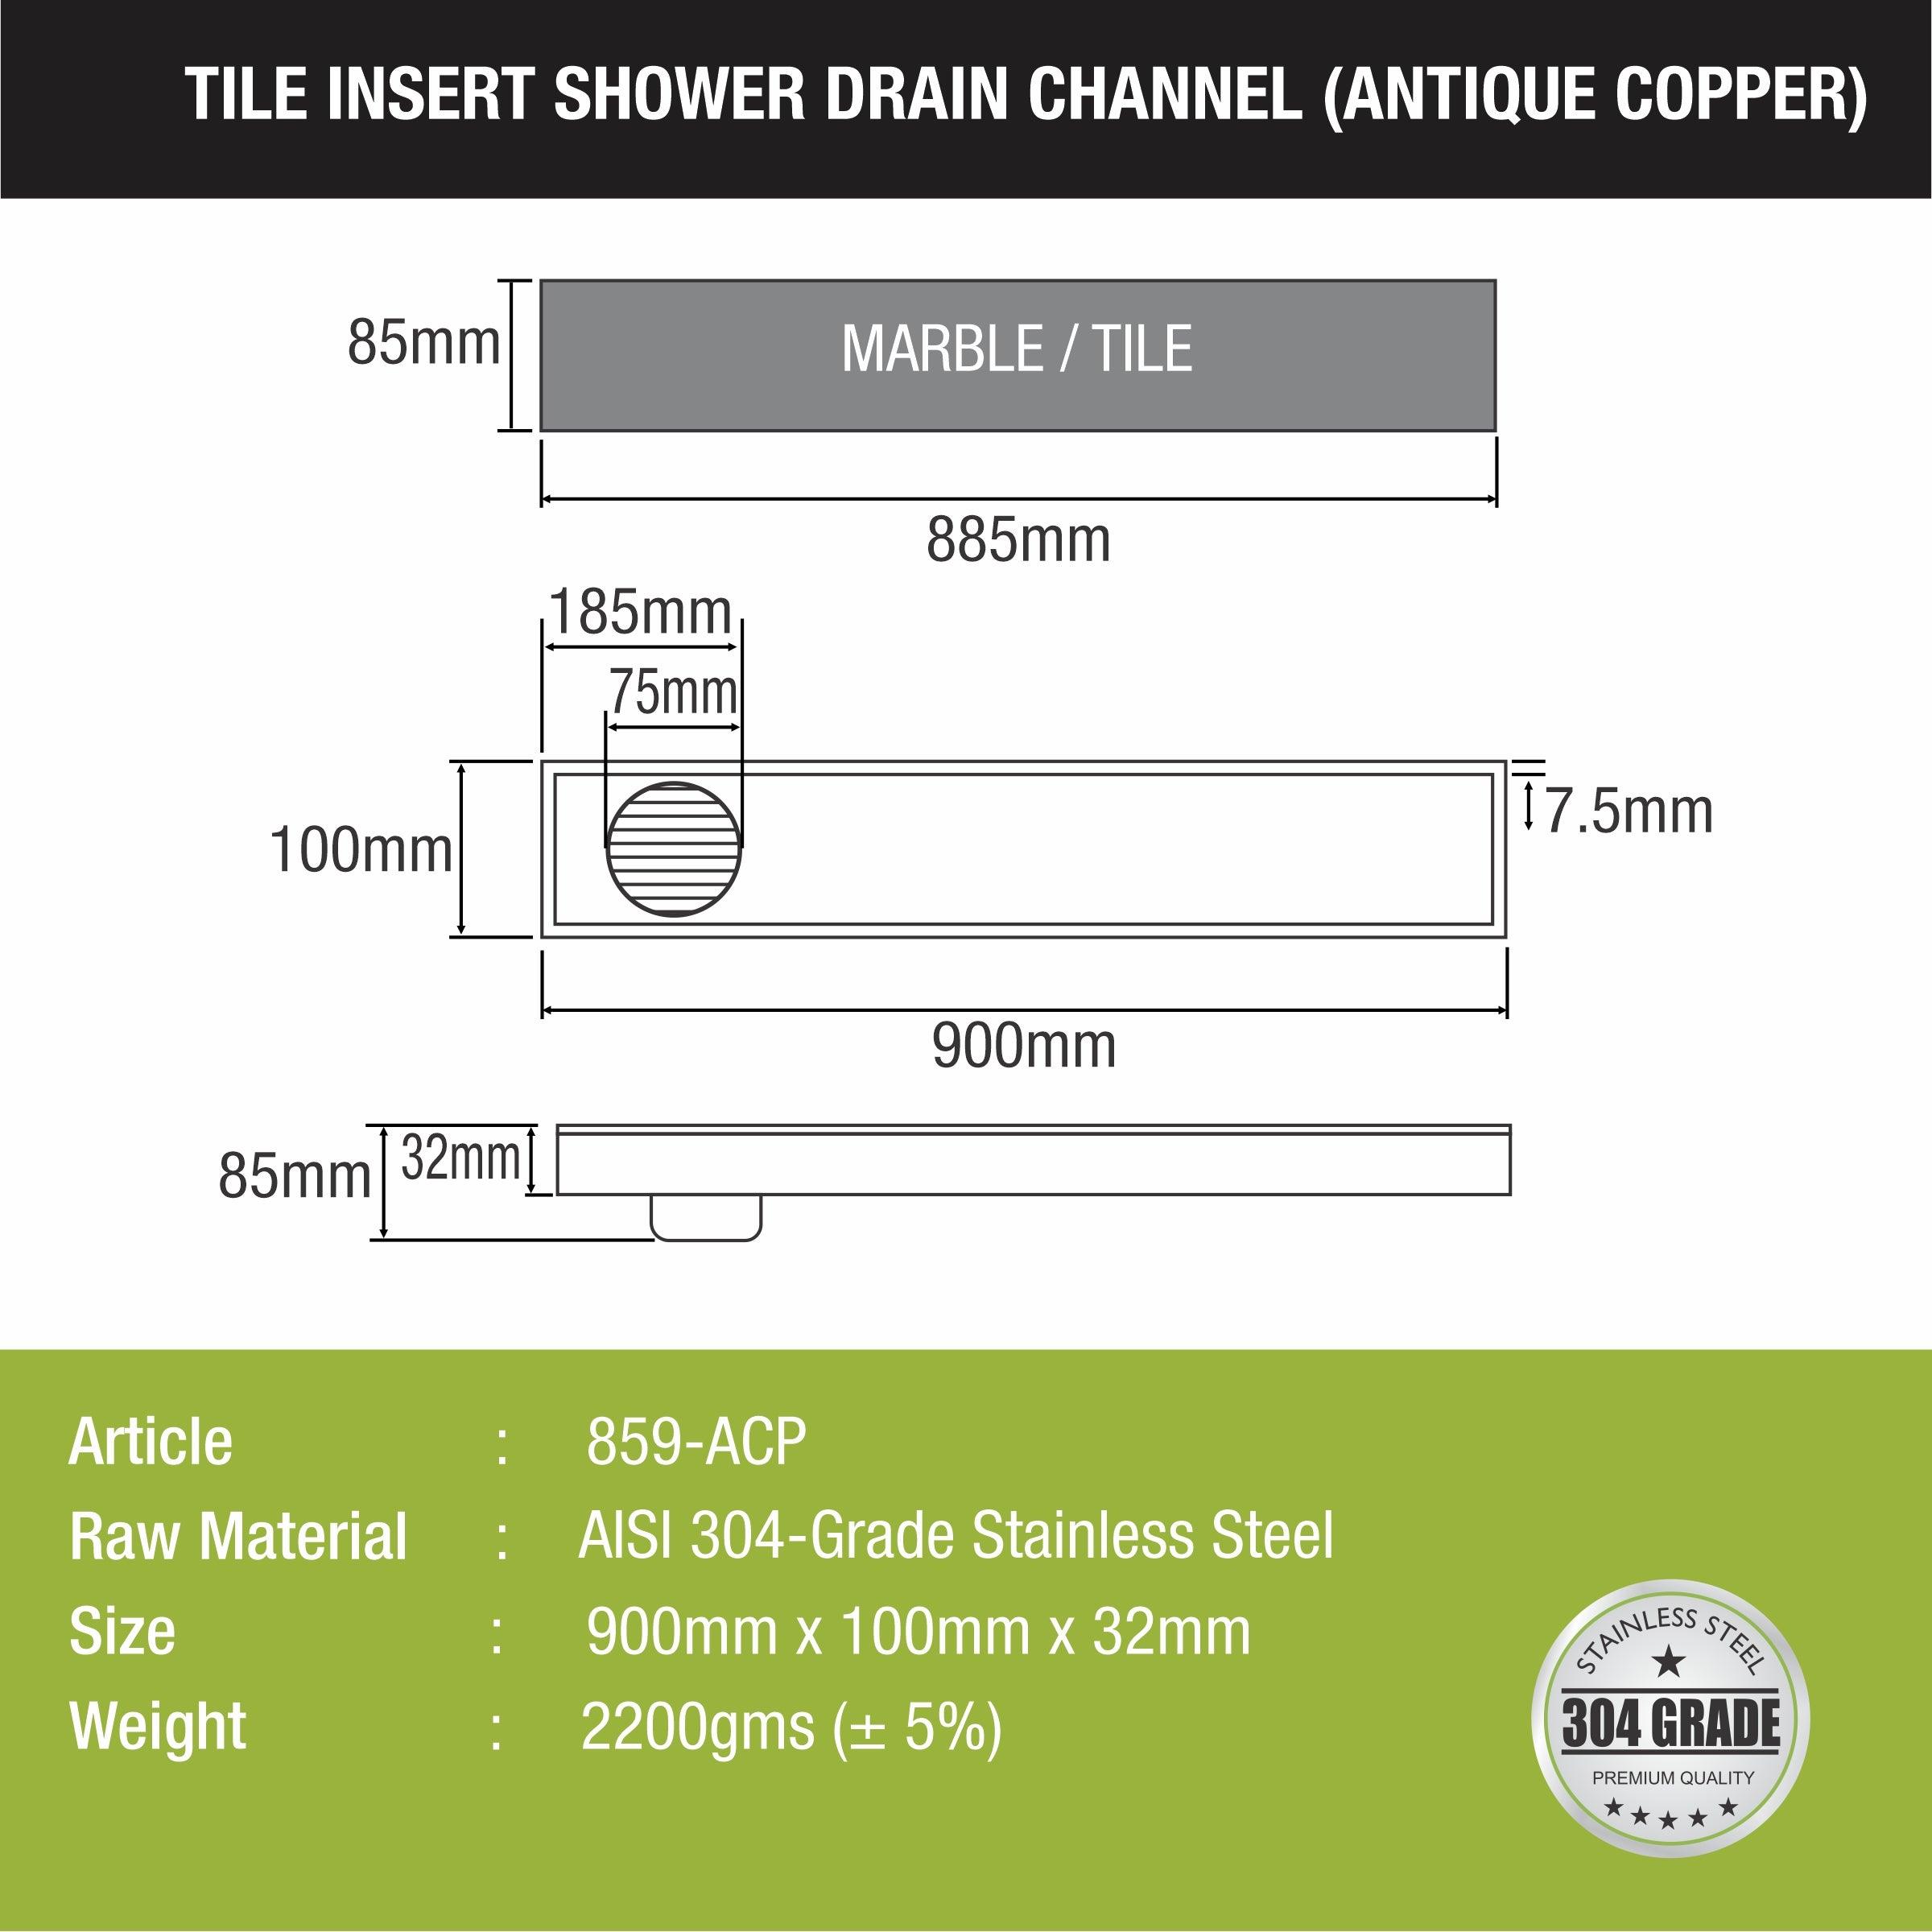 Tile Insert Shower Drain Channel - Antique Copper (36 x 4 Inches) sizes and dimensions